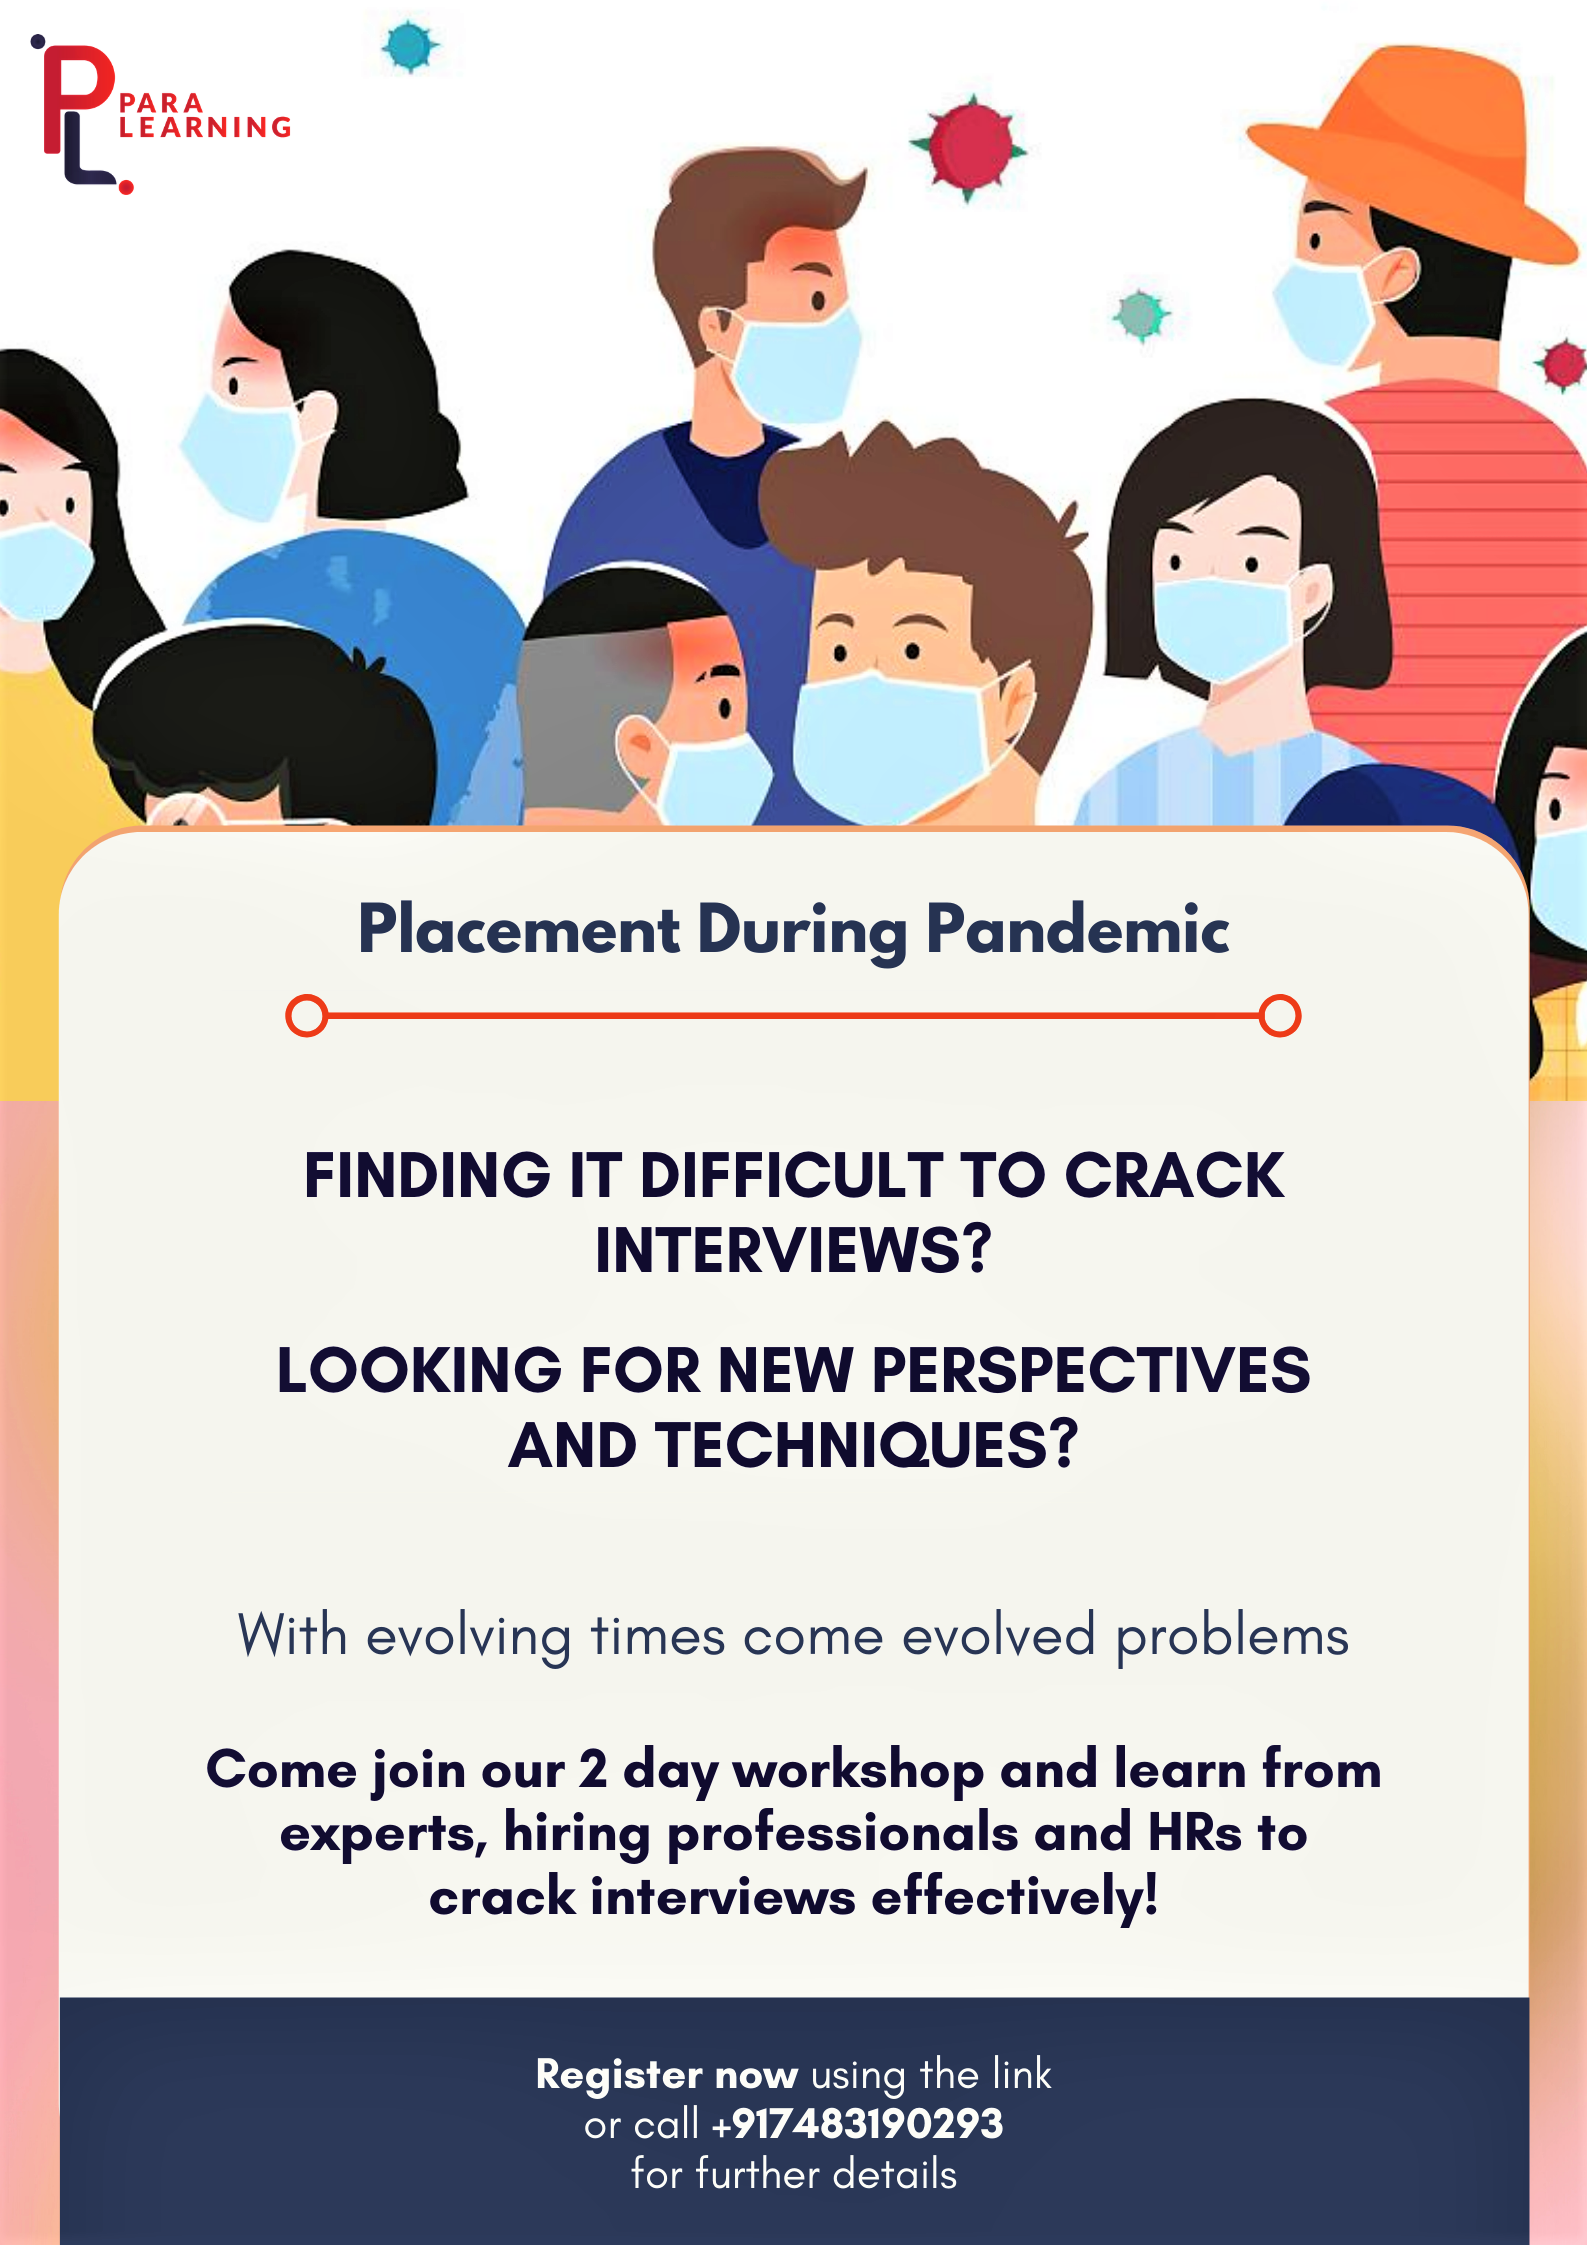 Placement During Pandemic - PARA Learning